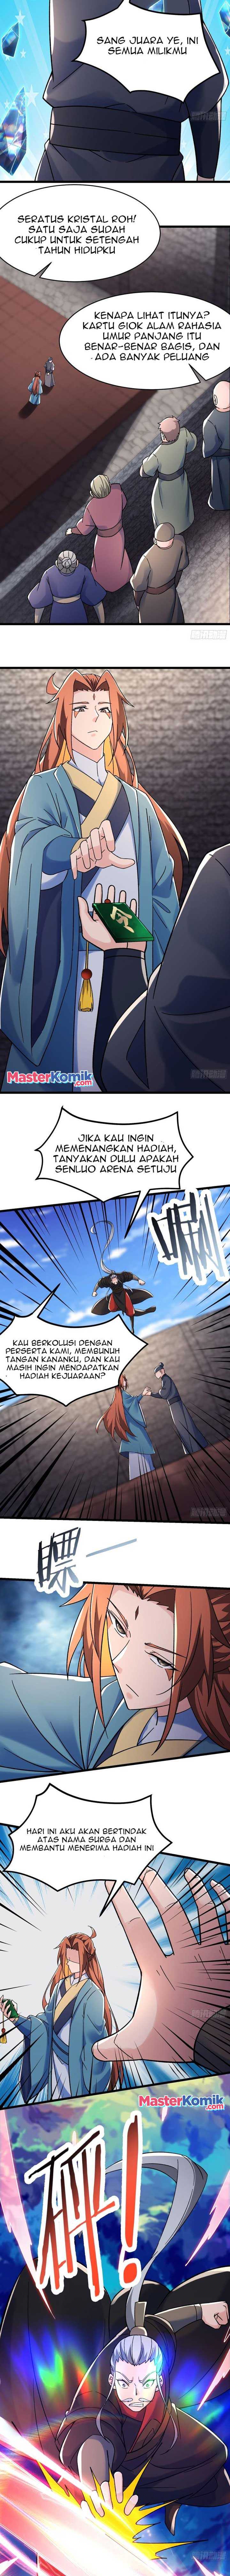 Apprentices Are All Female Devil Chapter 141